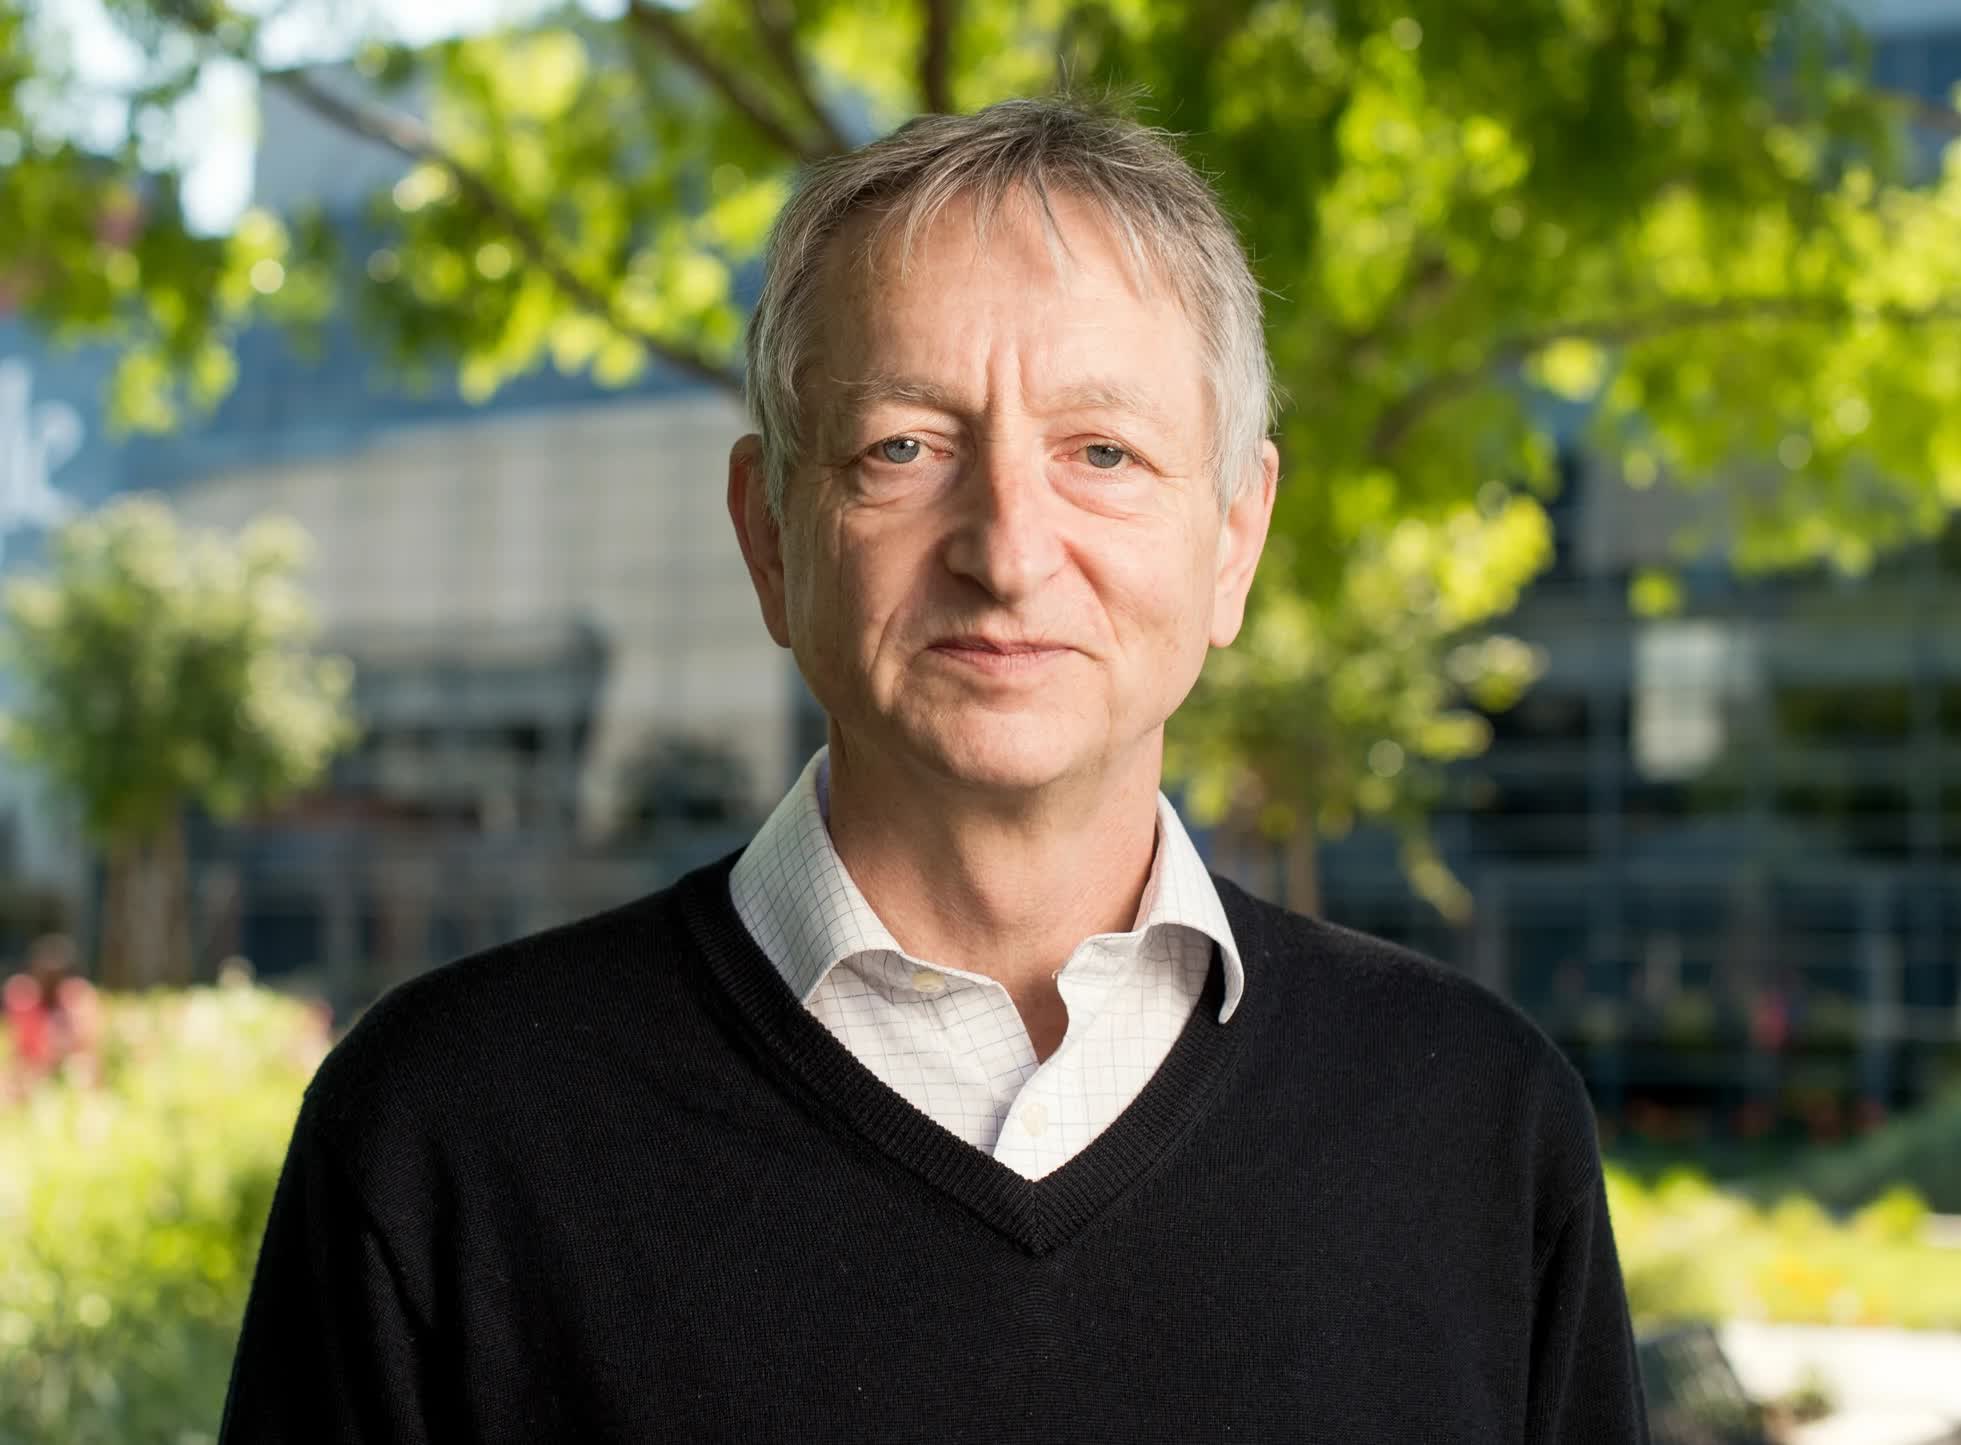 AI Pioneer Geoffrey Hinton Warns of Job Loss, Inequality, and Extinction Risks; Advocates Universal Basic Income